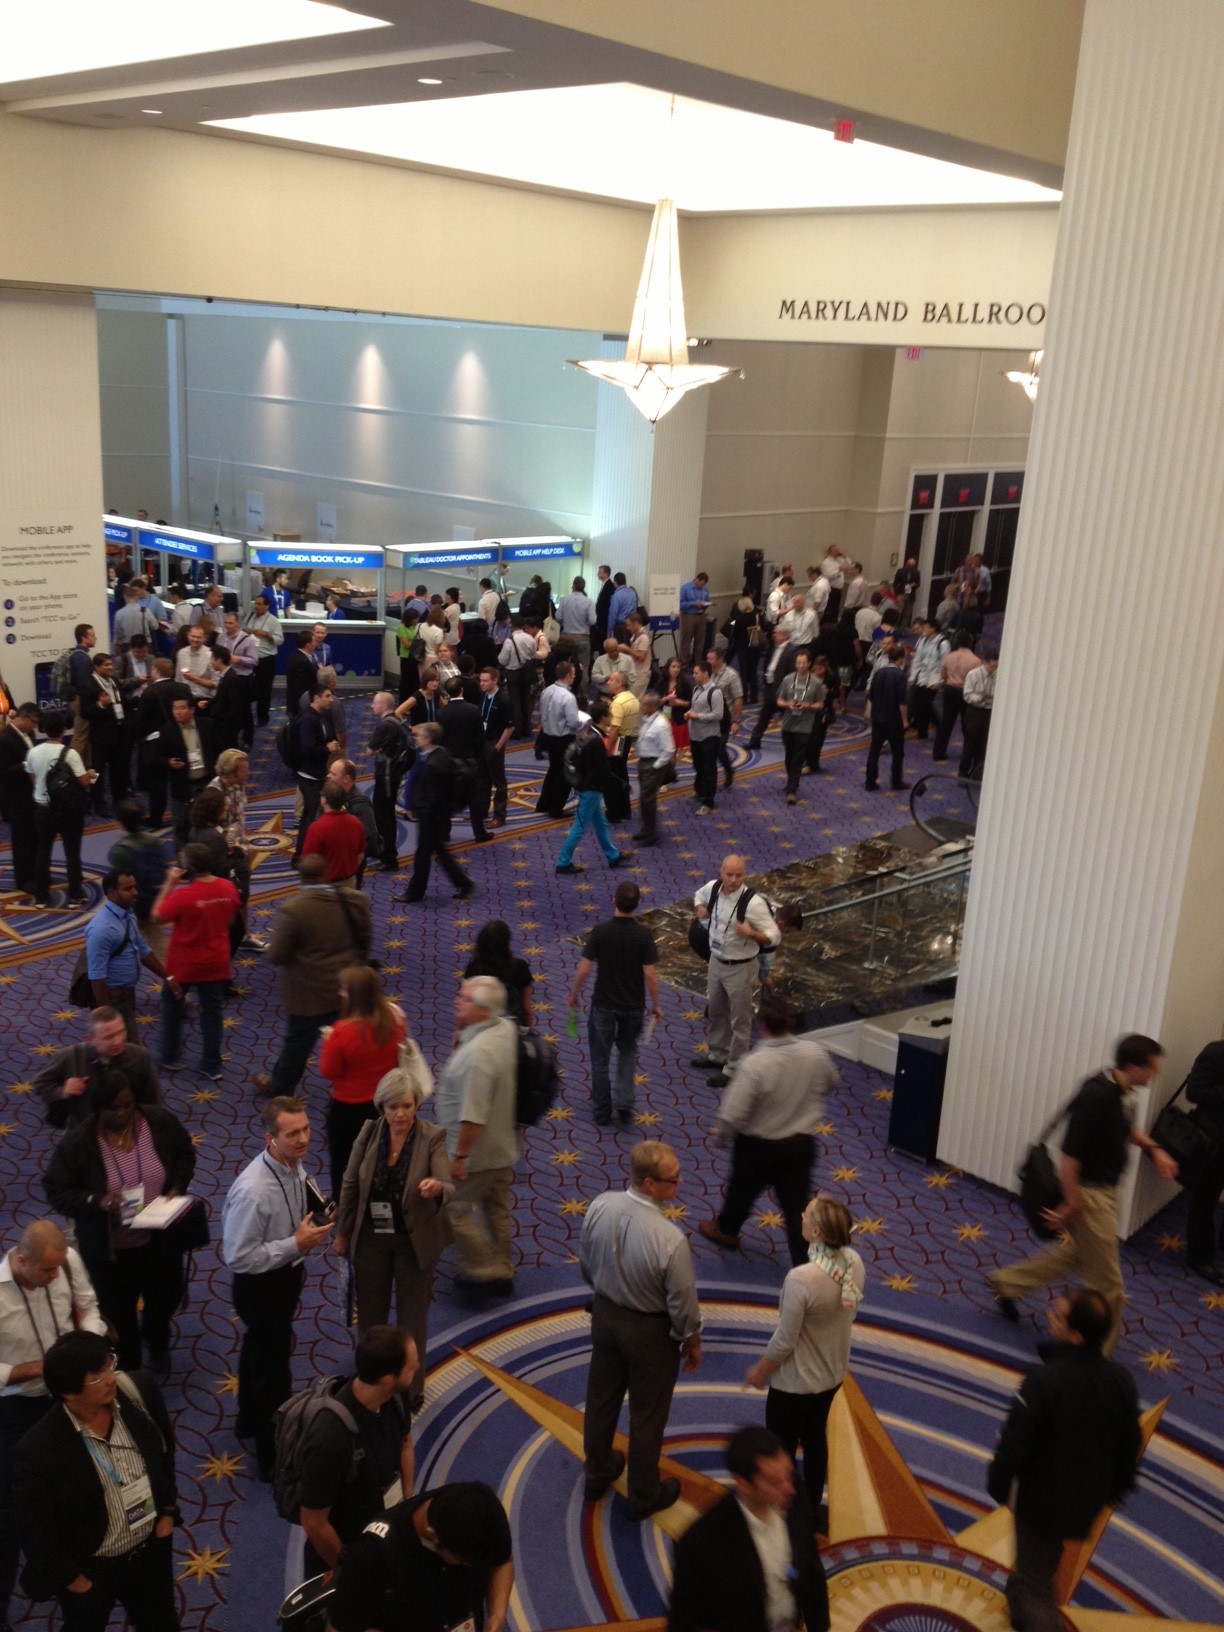 conference-crowd-gaylord-national-convention-center-september-2013-photo-by-joe-mckendrick.jpg